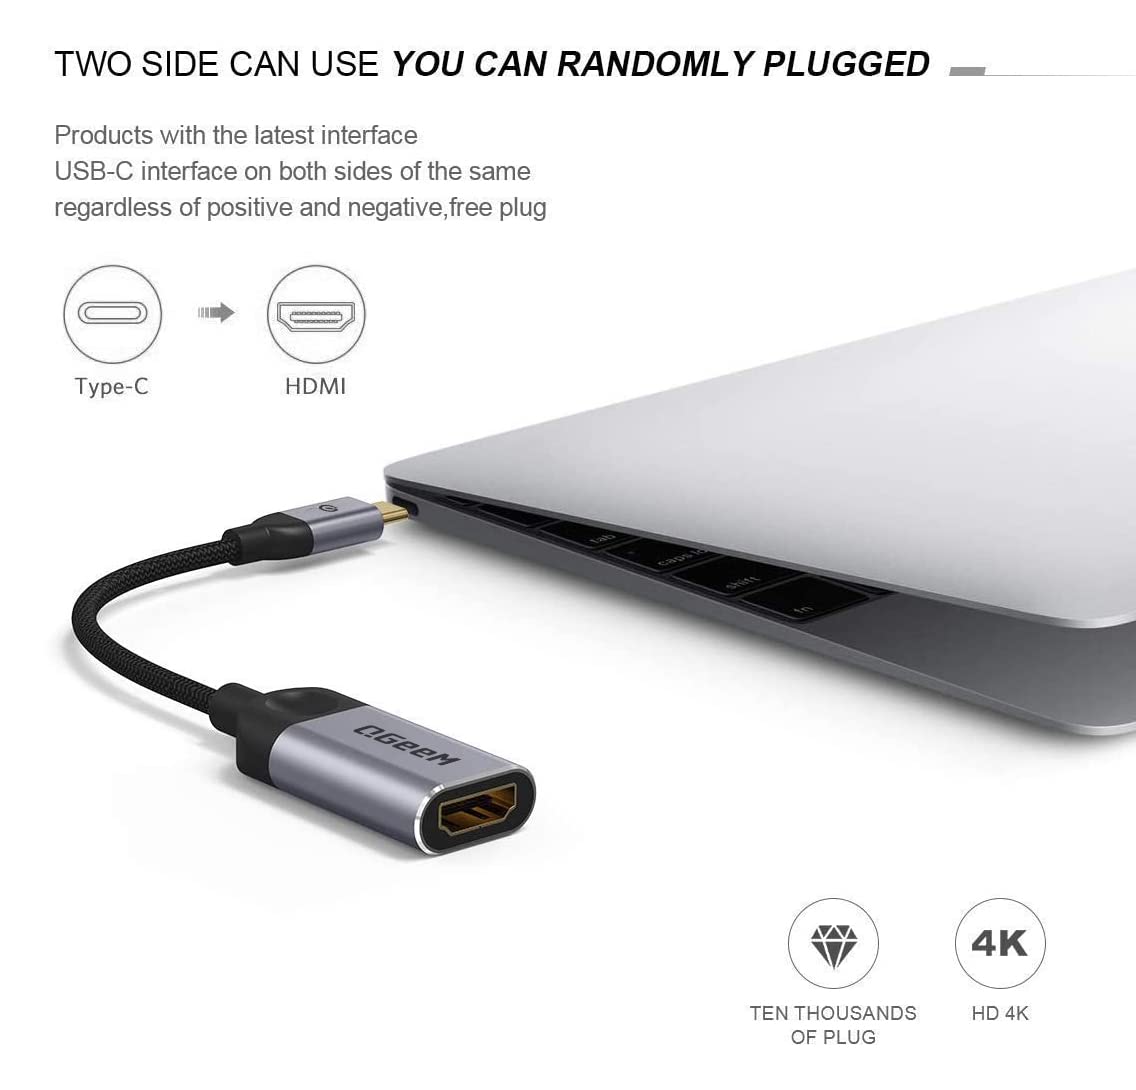 QGeeM USB C to HDMI Adapter 4K Cable, USB Type-C to HDMI Adapter [Thunderbolt 3 Compatible] Compatible with MacBook Pro 2018/2017, Samsung Galaxy S9/S8, Surface Book 2, Dell XPS 13/15, Pixelbook More